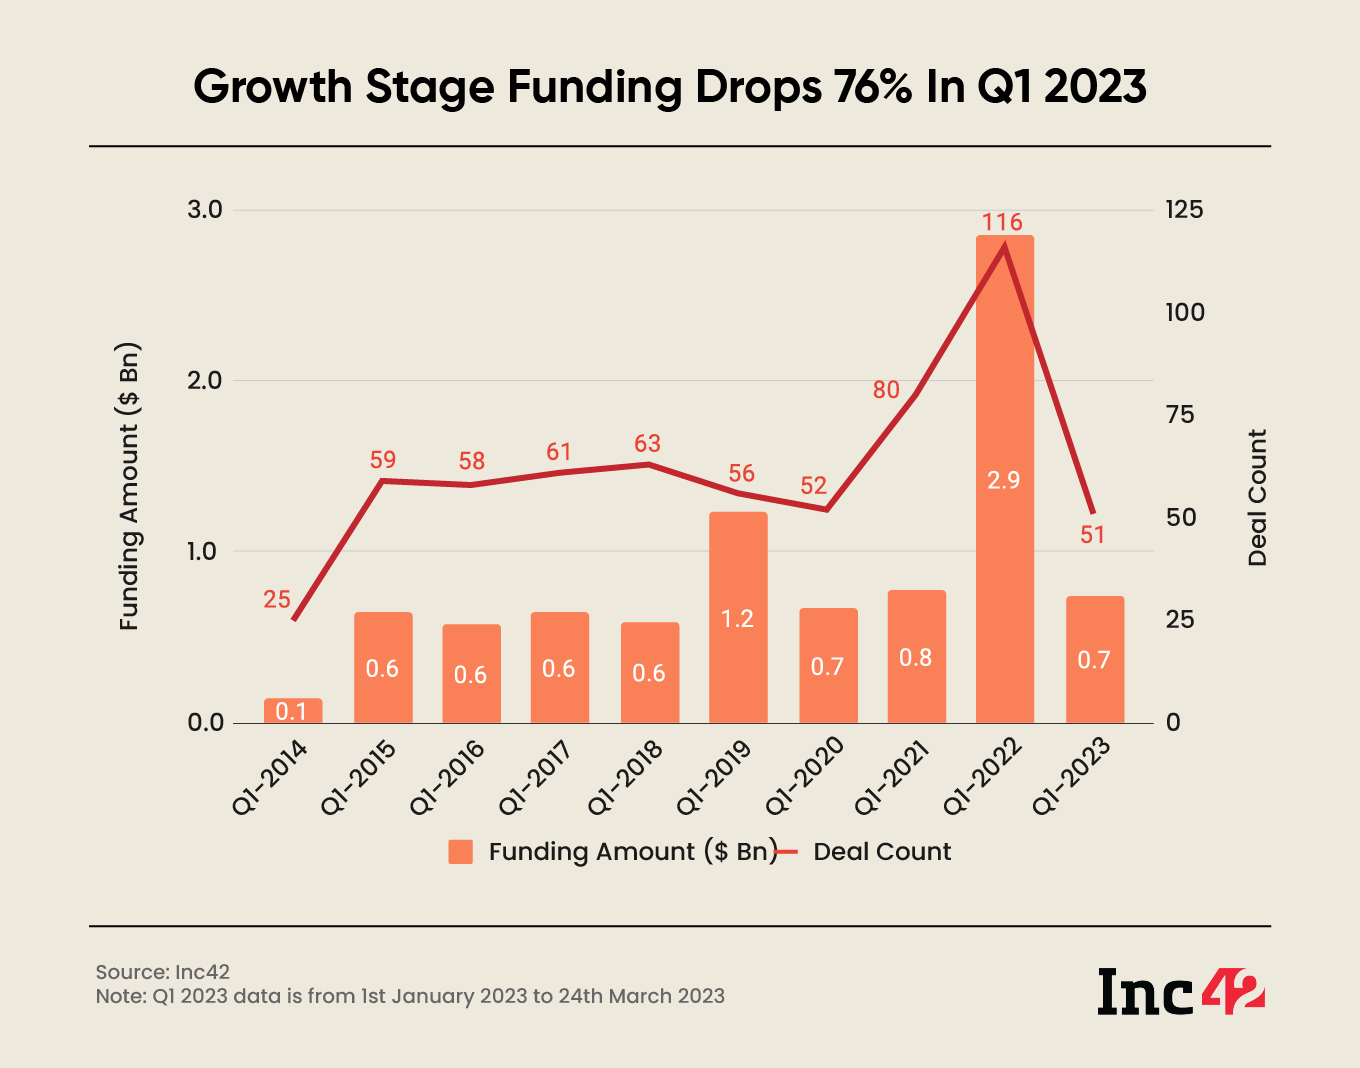 growth-stage funding declined 76% year-on-year (YoY) to $747 Mn in the first quarter (Q1) of 2023 from $2.9 Bn in Q1 2022.